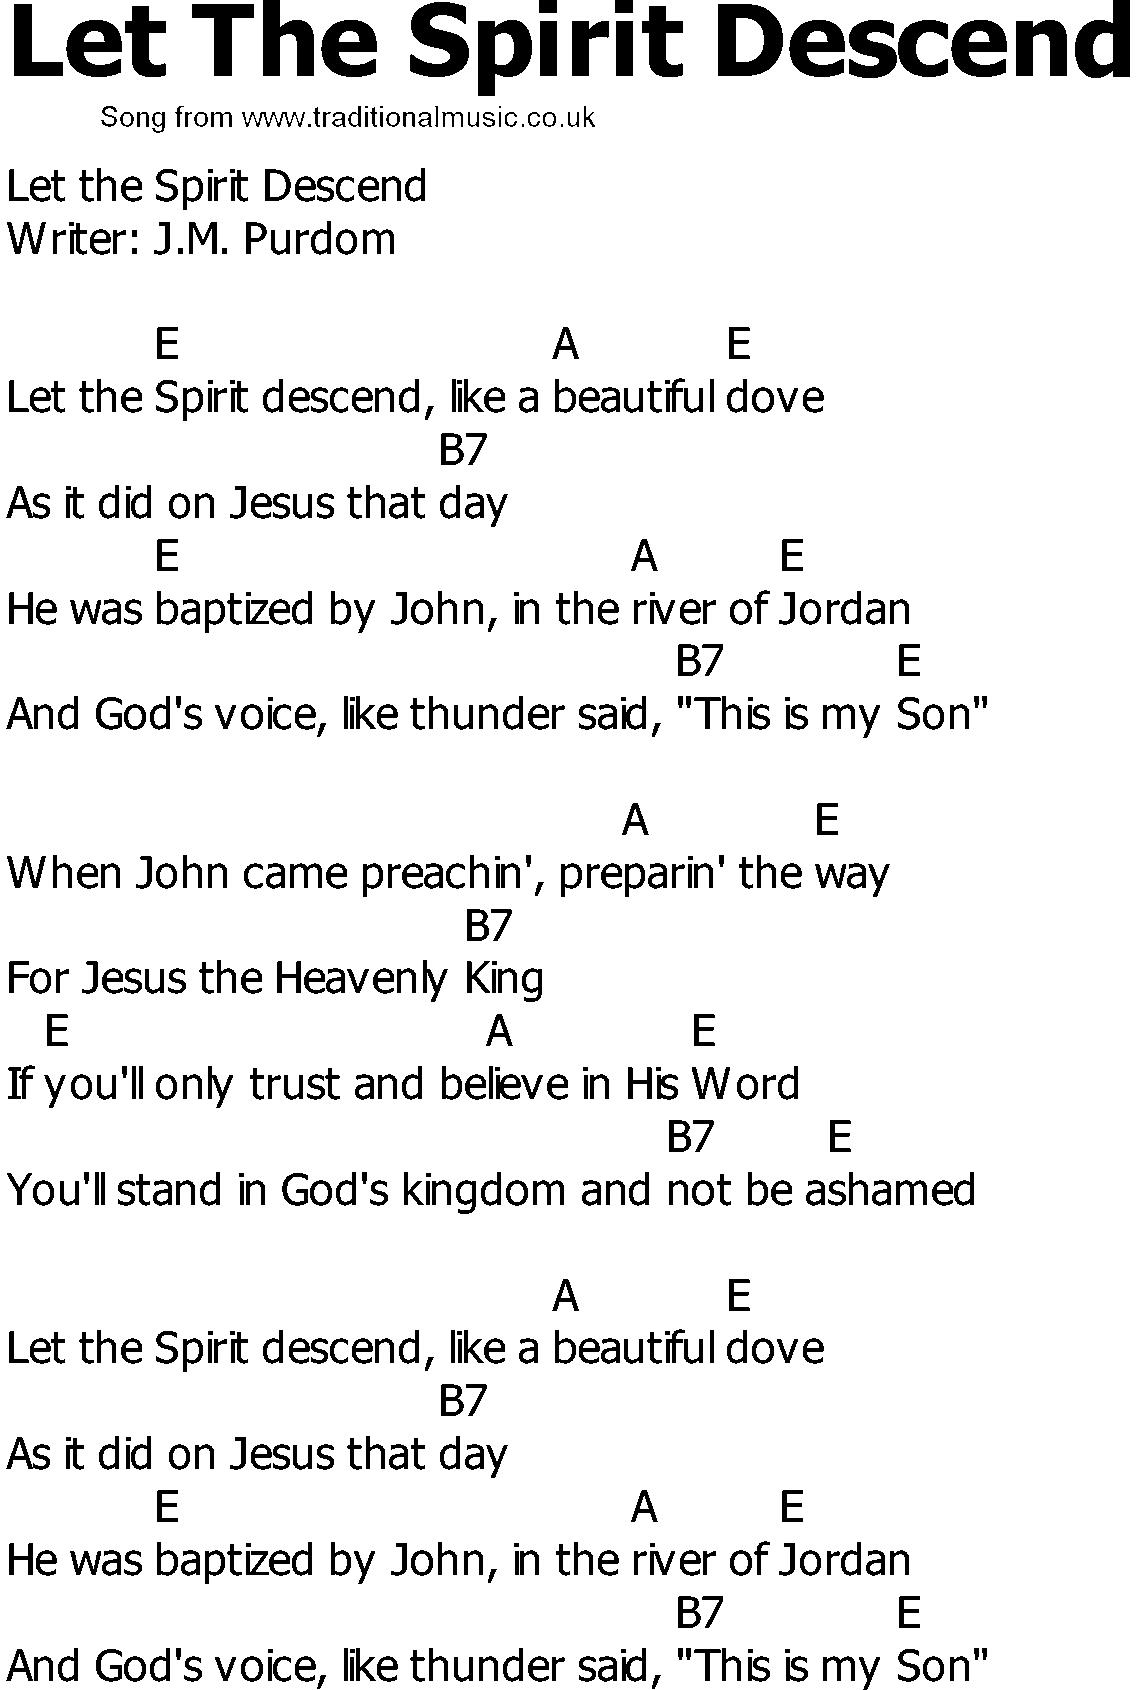 Old Country song lyrics with chords - Let The Spirit Descend